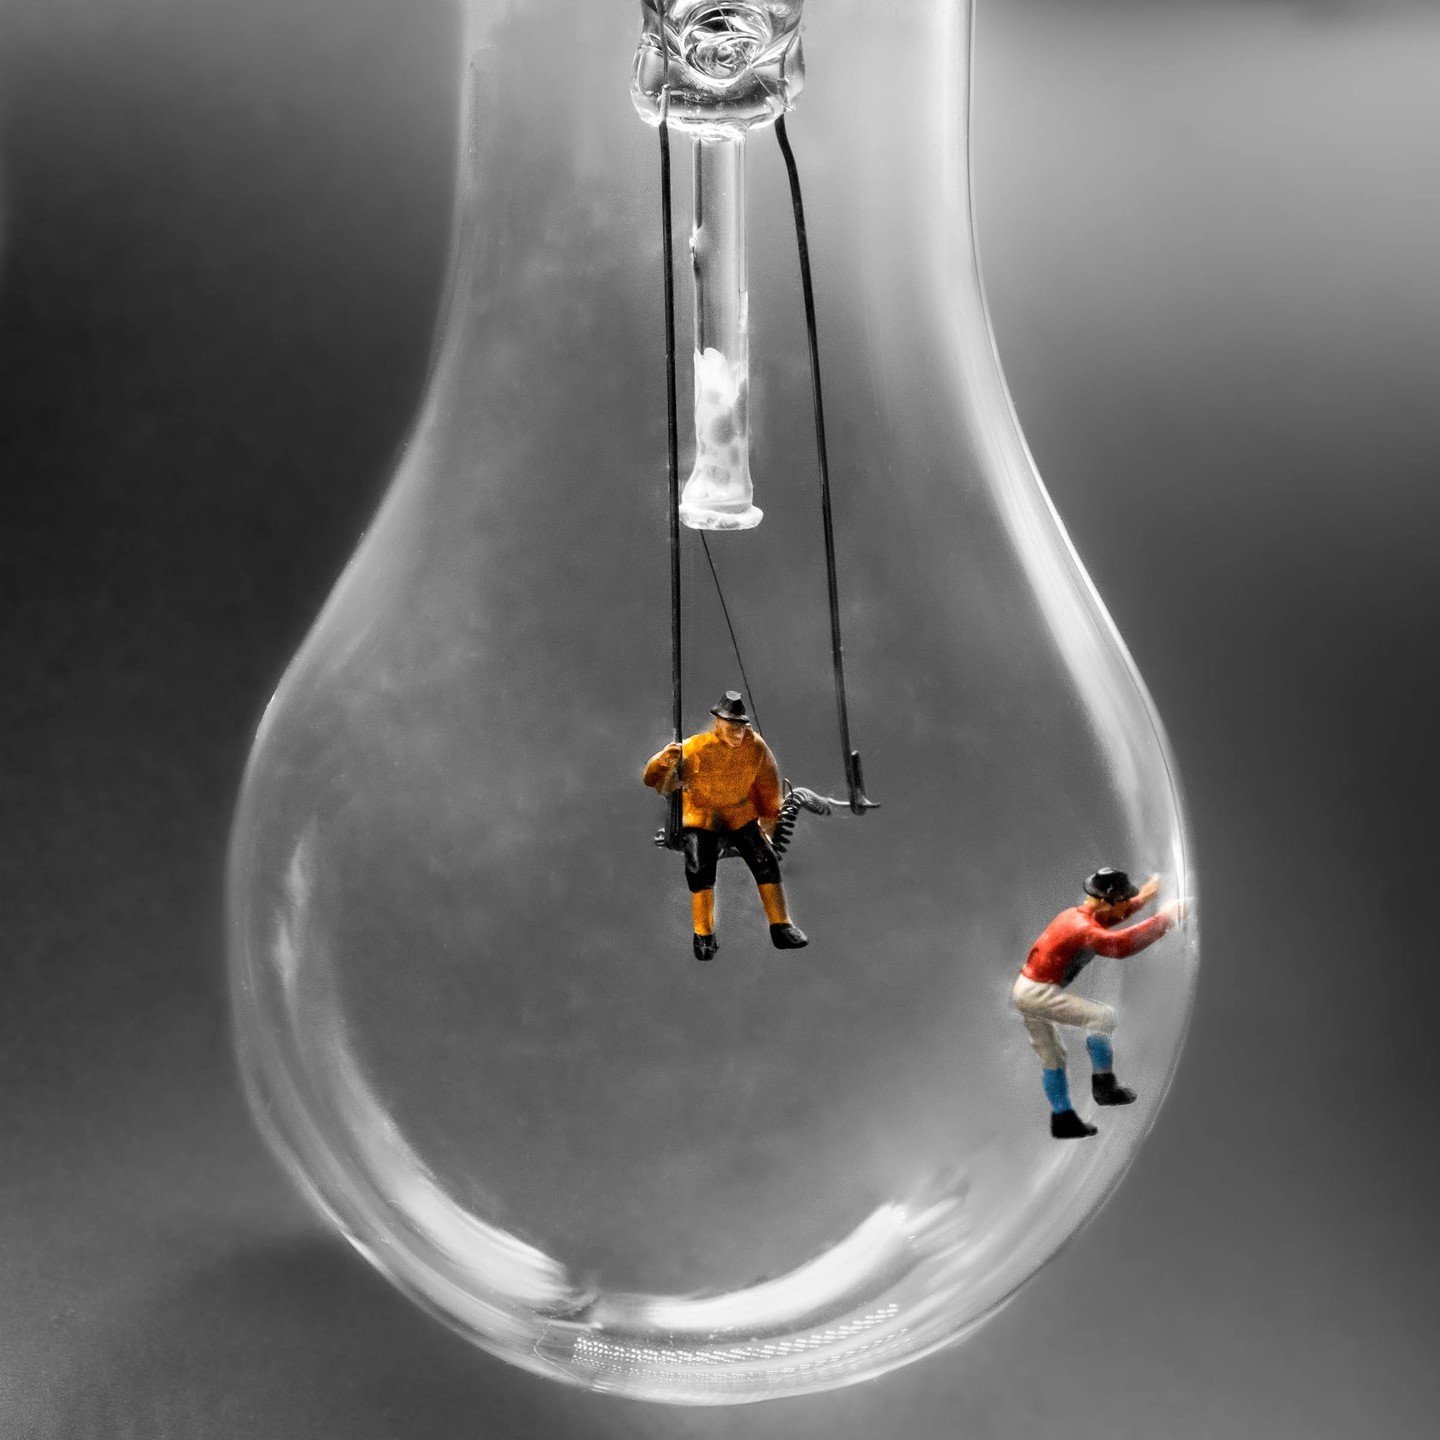 &quot;Hanging Out In A Bulb&quot; is a stunning Mixed Media/Sculpture piece by December 2022 Edition Winner of the Monthly Art Award, David Birozy 👁️🖌️⁠
⁠
Double-tap and show some love! ❤️😍⁠
⁠
#mixedmediaart #artist #boynesartistaward #artaward